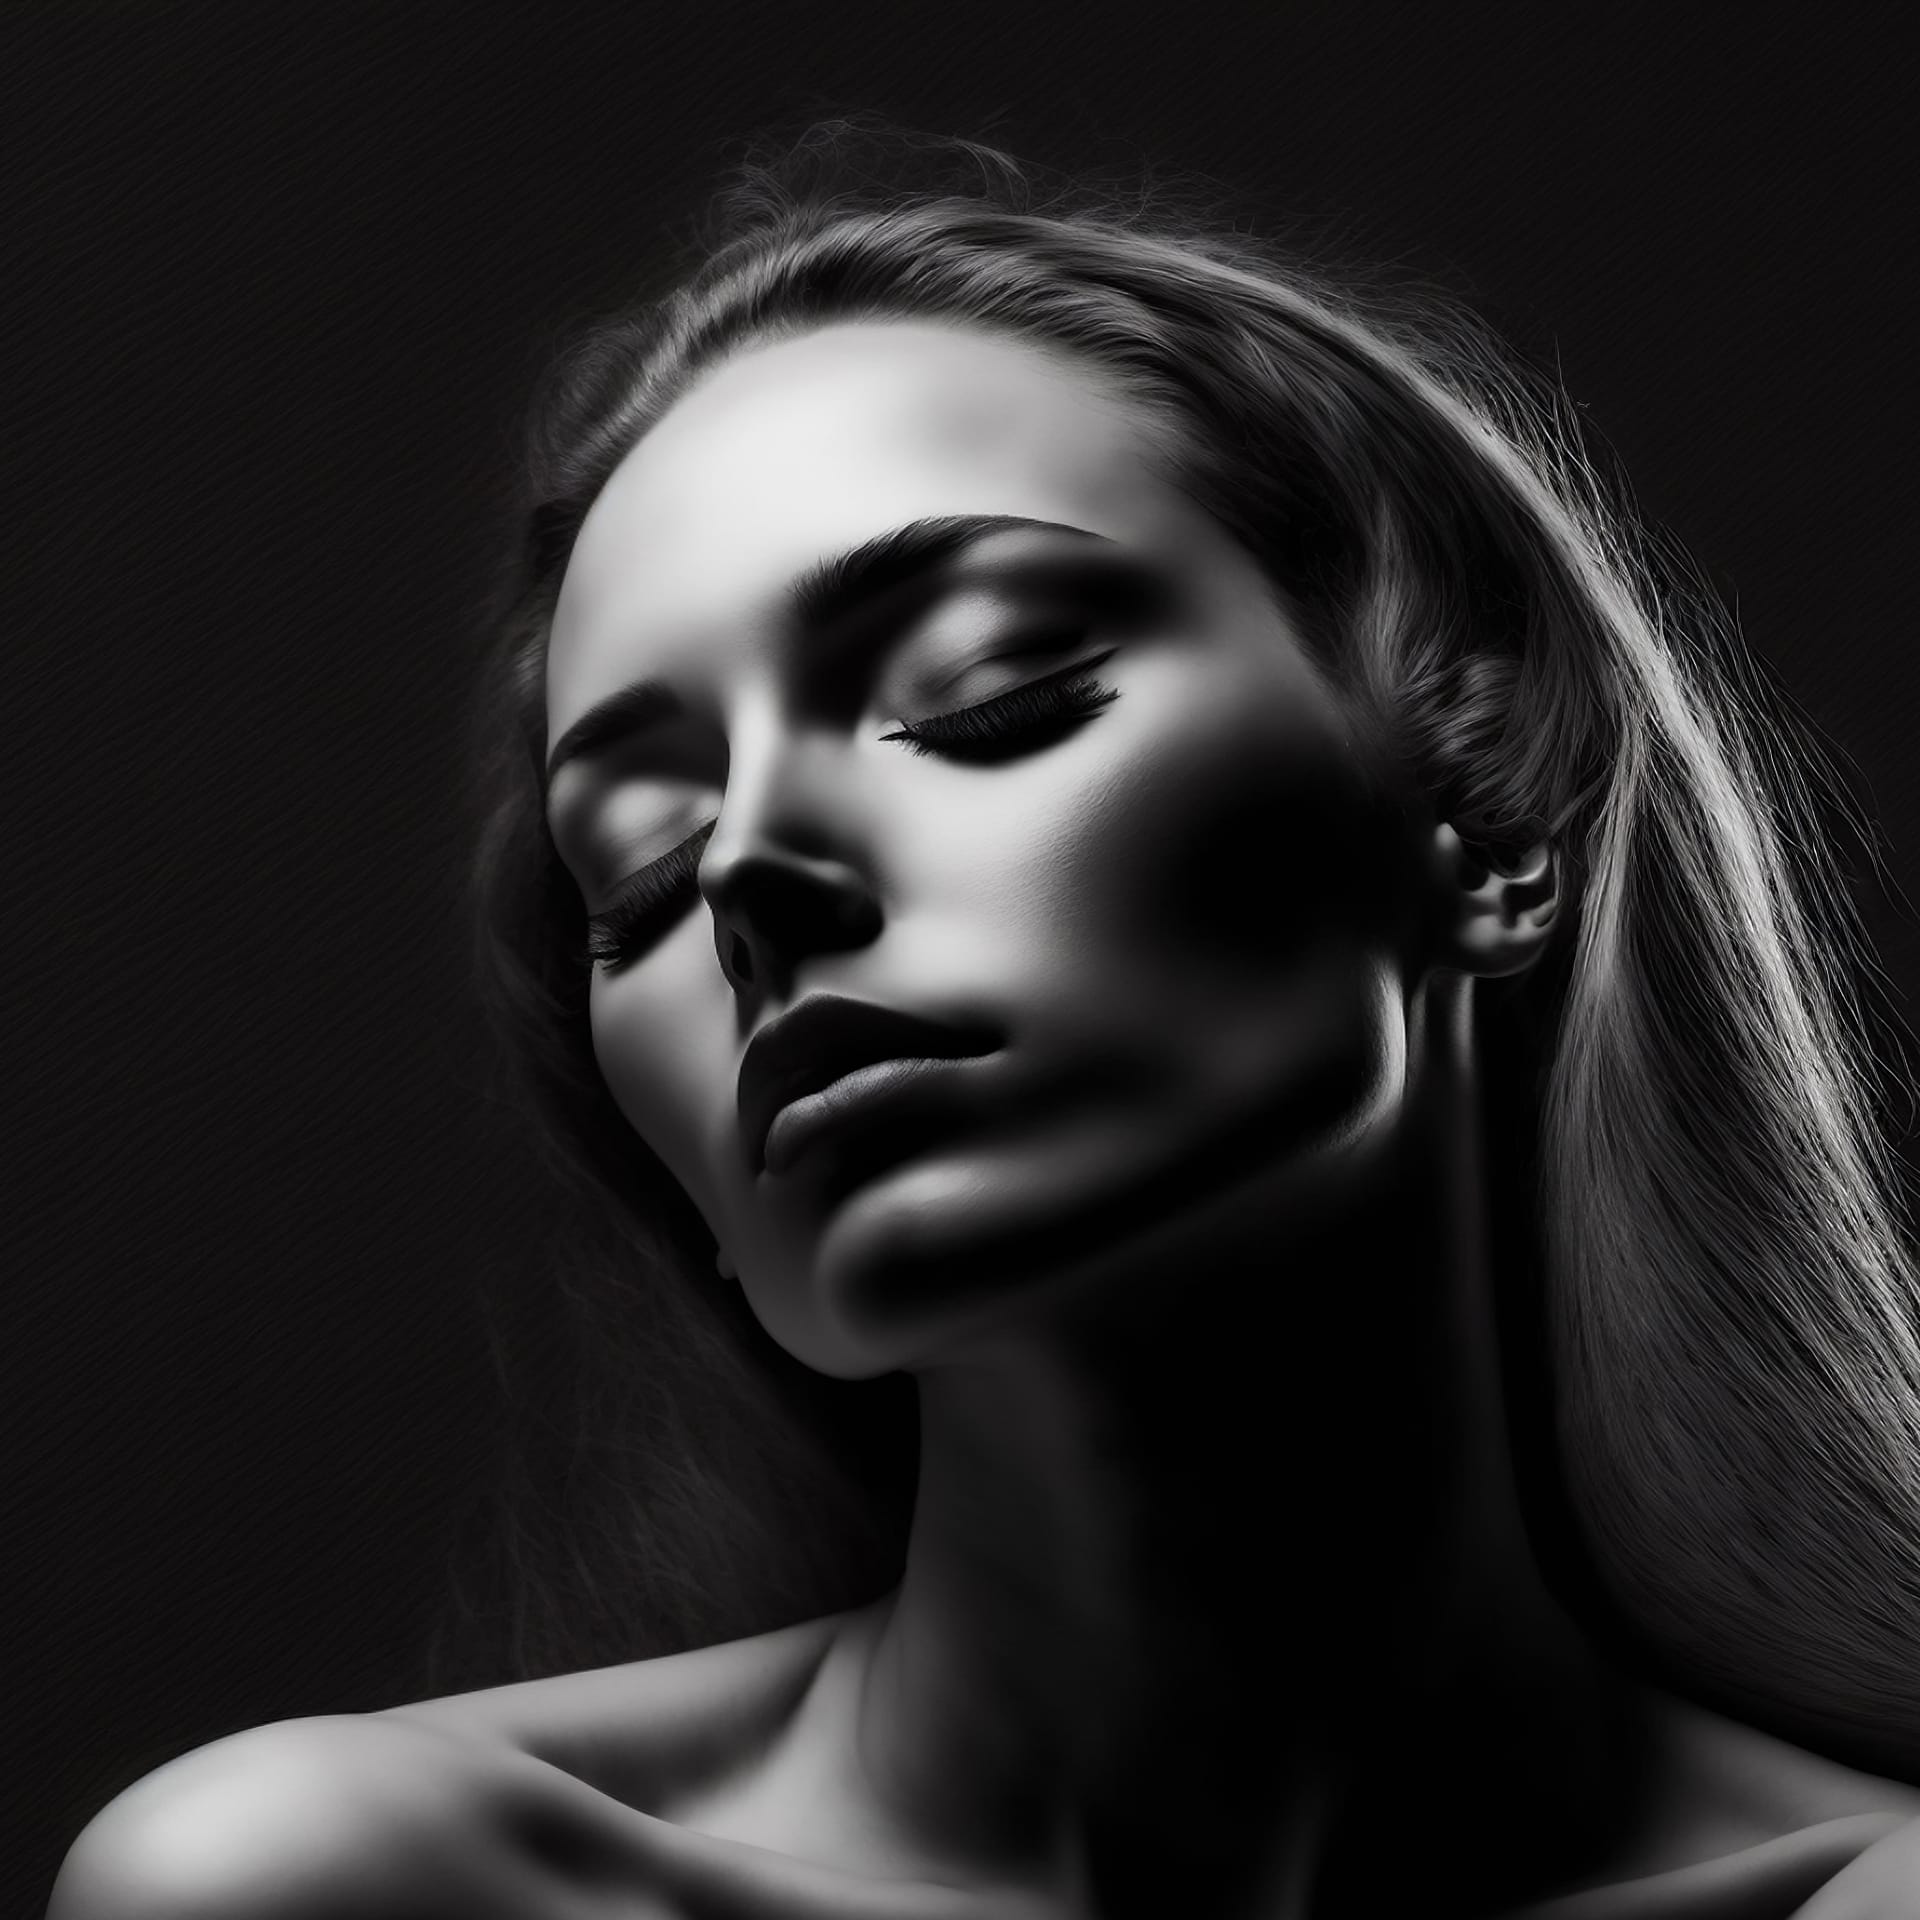 Digital painting beautiful topless woman with closed eyes black background